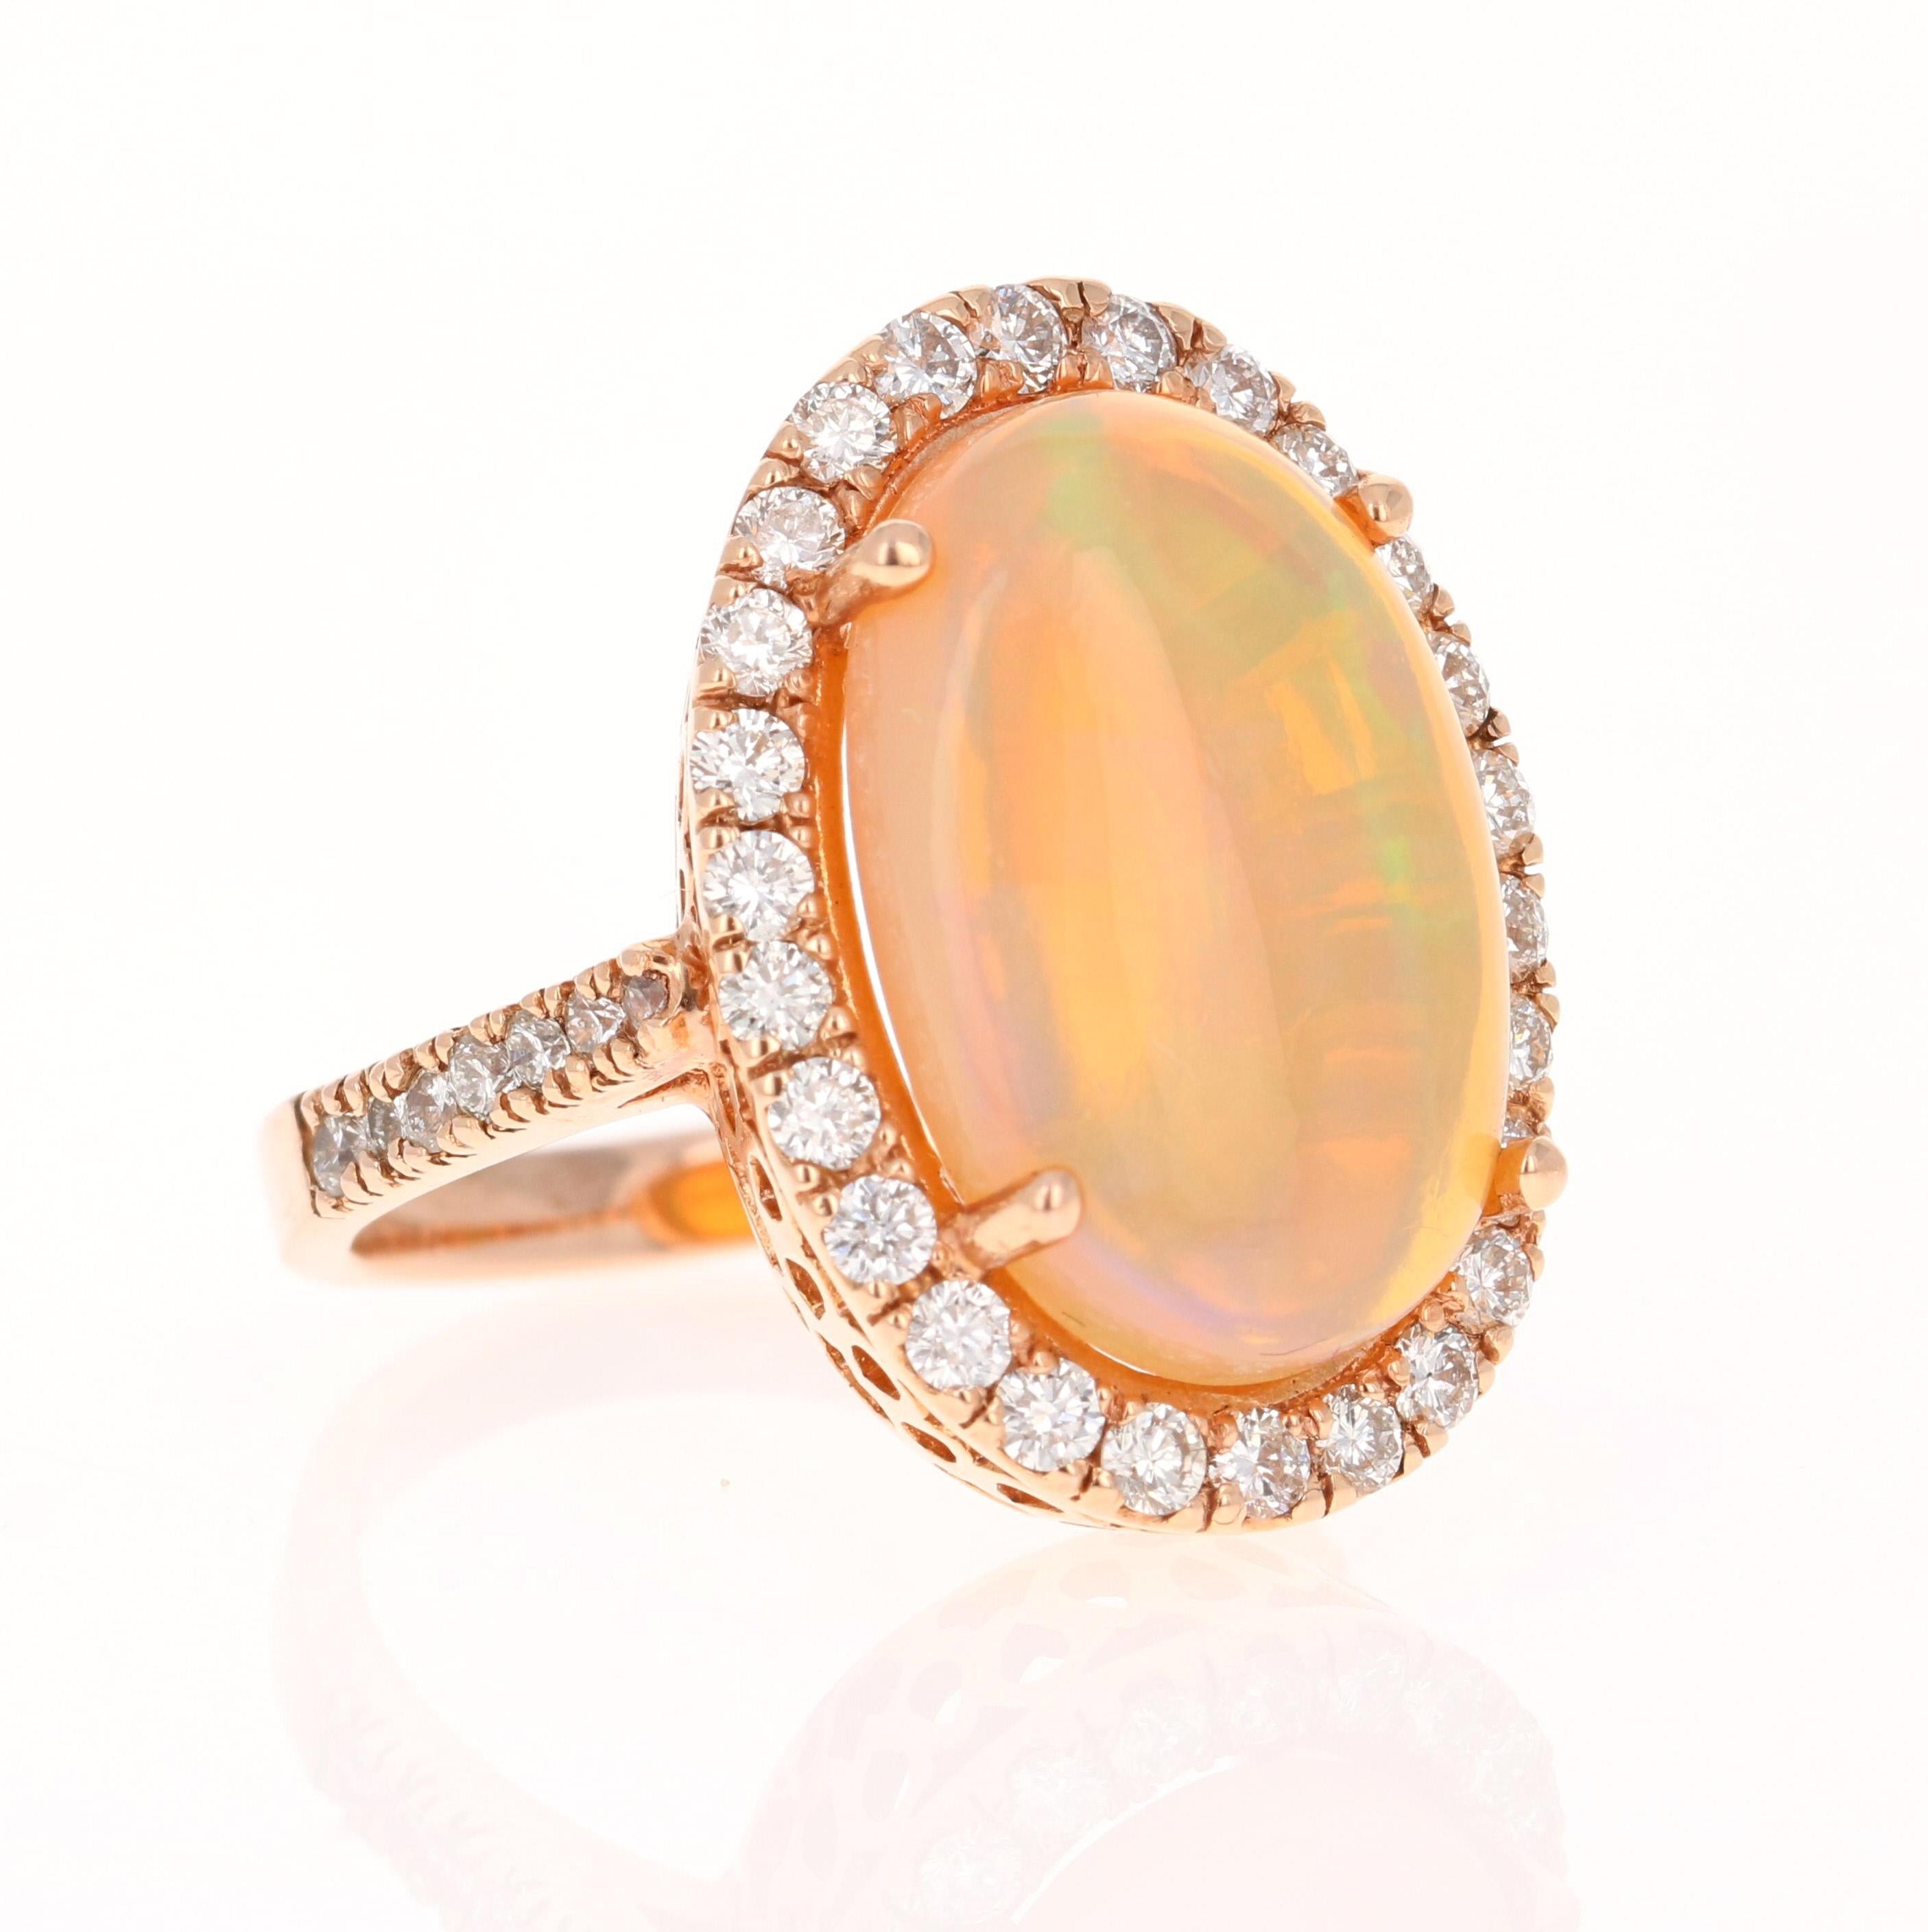 This ring has a 6.92 Carat Opal that is curated in a unique 14 Karat Rose Gold setting. The setting is adorned with 40 Round Cut Diamonds that weigh 1.15 Carats. (Clarity: VS, Color: H) The total carat weight of the ring is 8.07 Carats.

The Opal